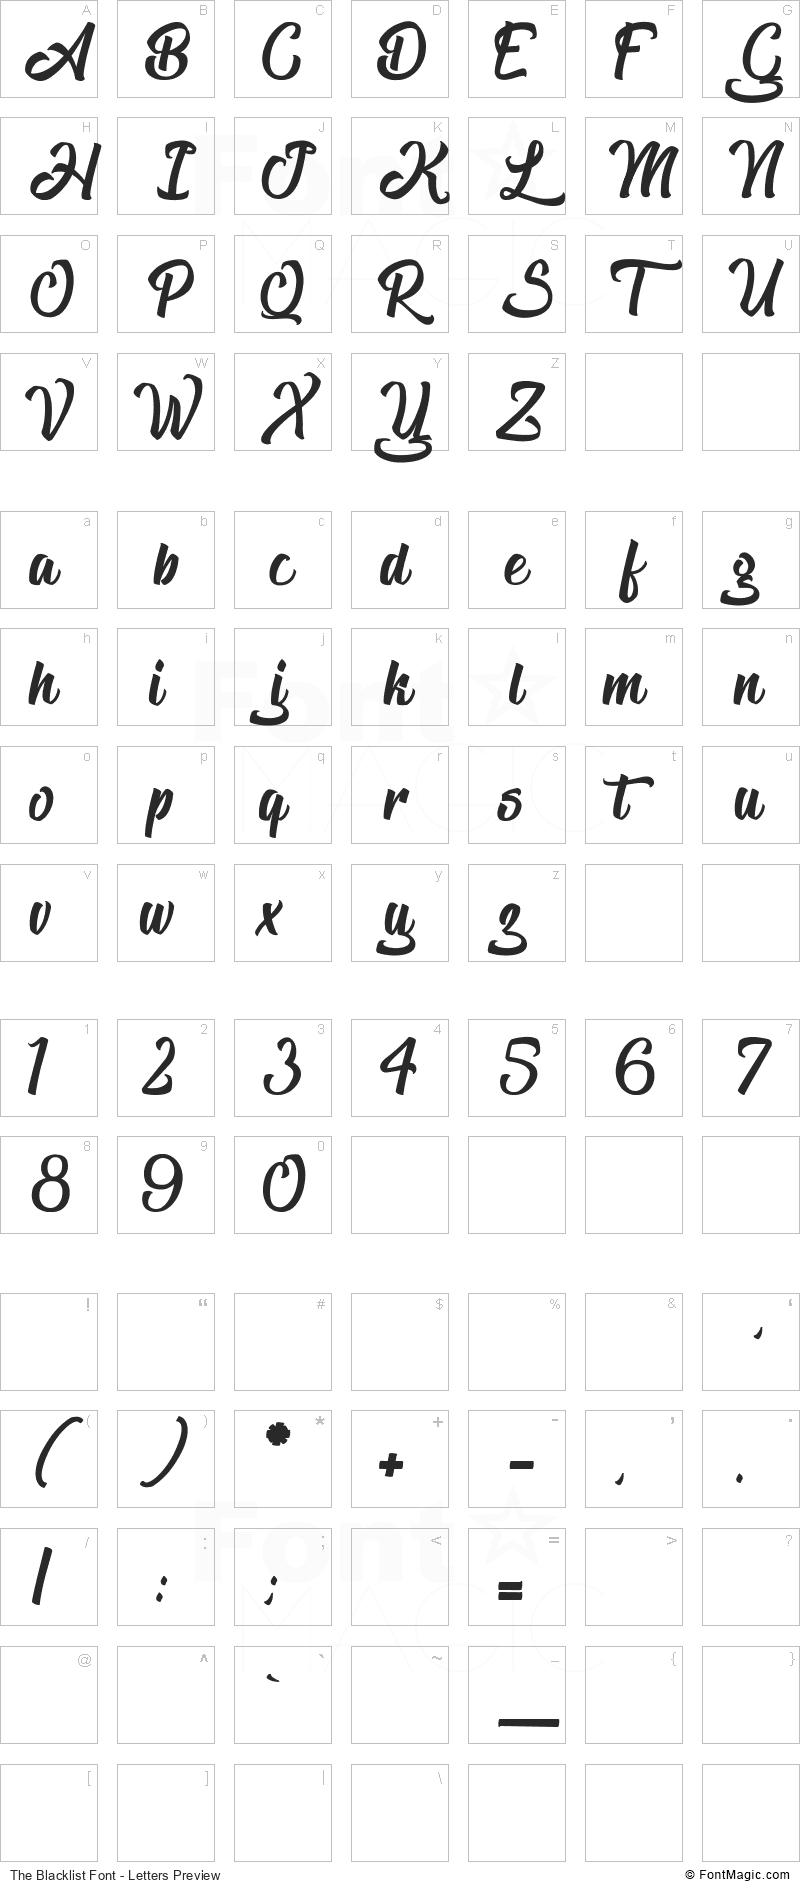 The Blacklist Font - All Latters Preview Chart